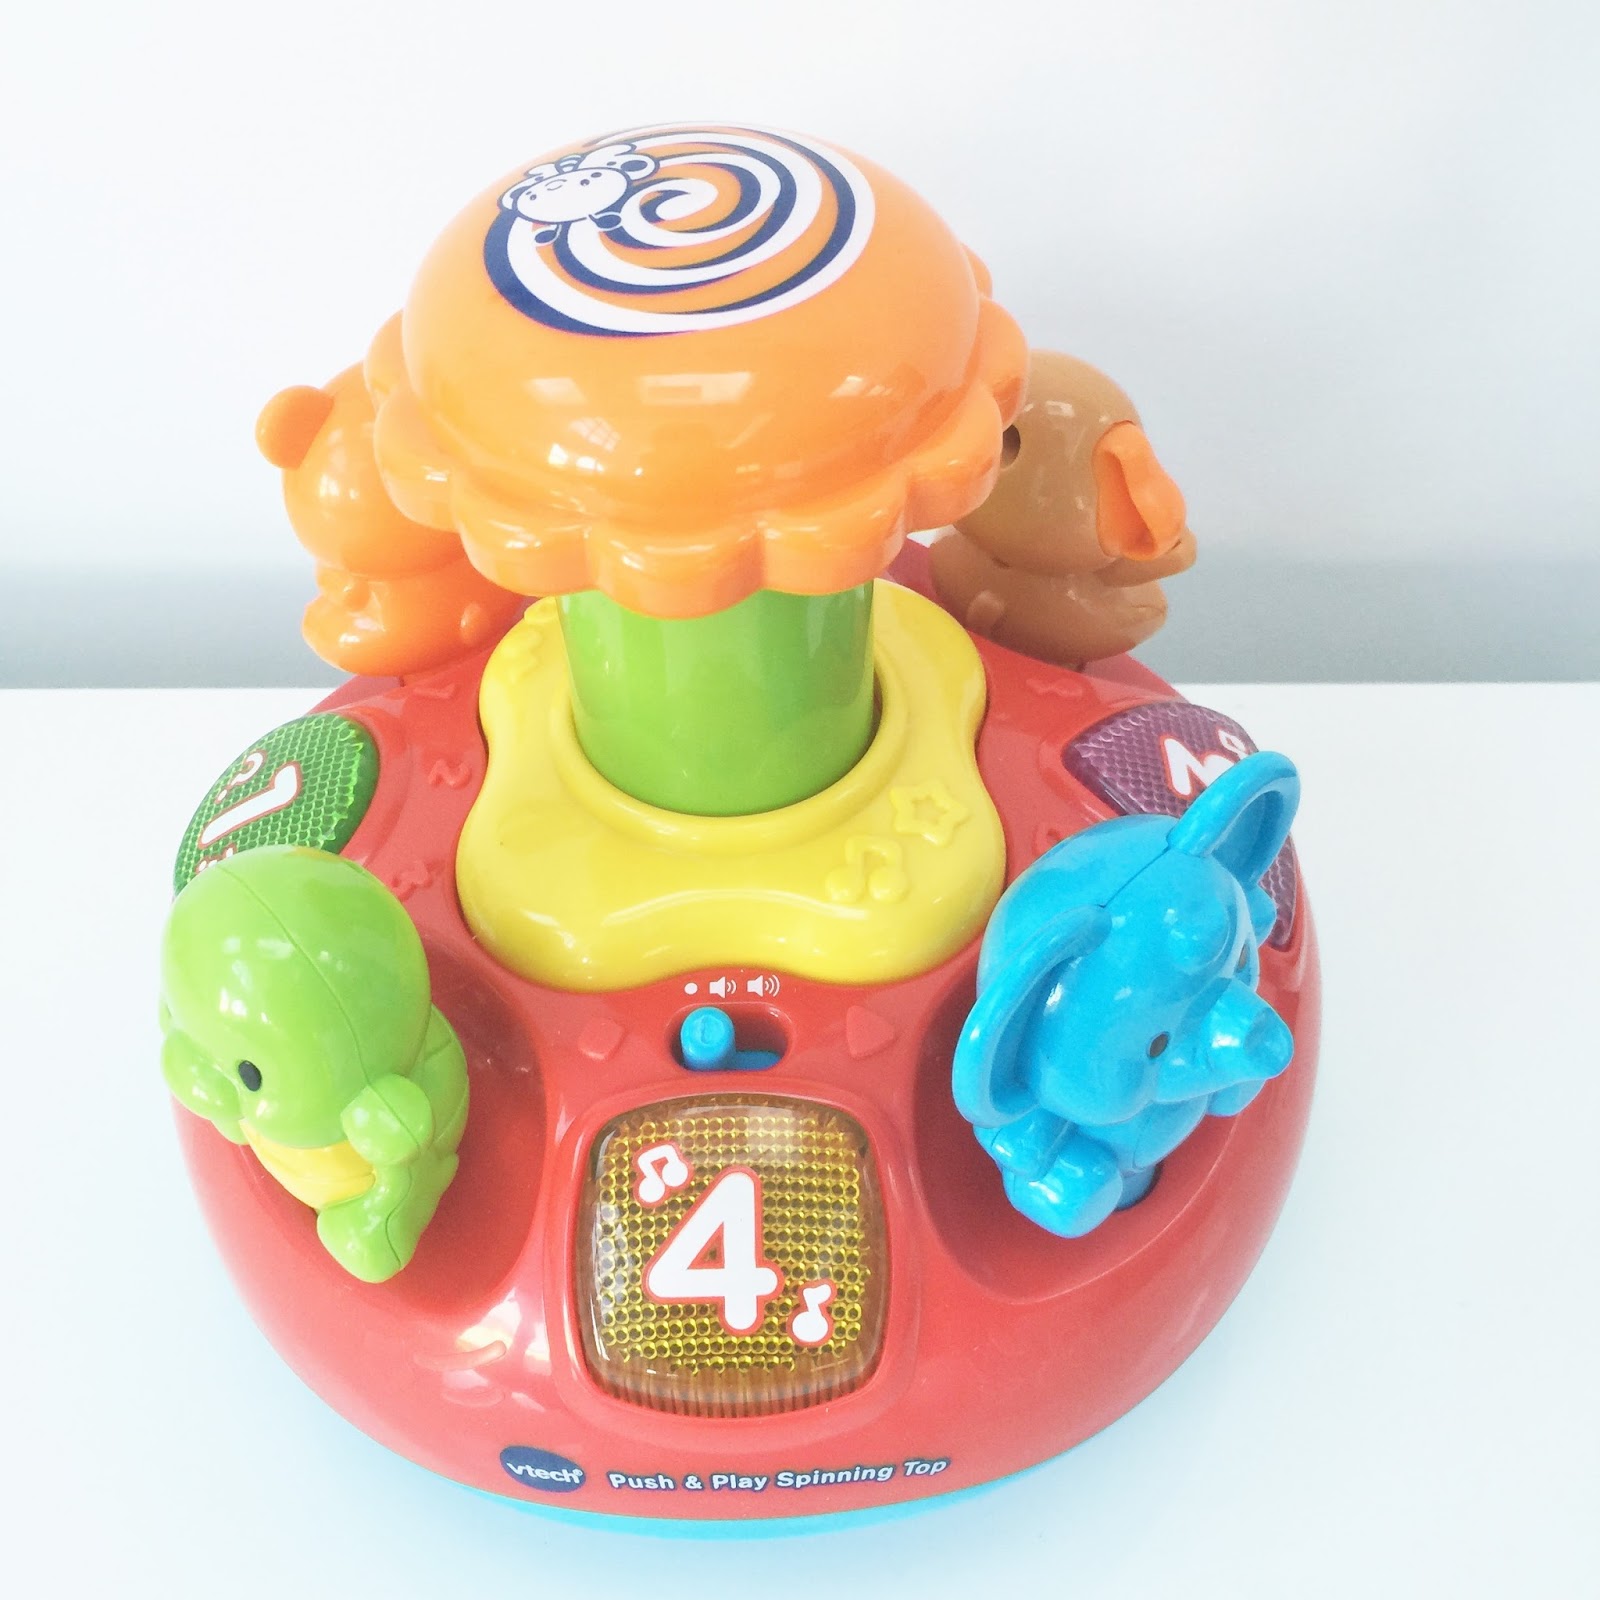 VTech Baby Push and Play Spinning Top Toy Without Additional Batteries for sale online 